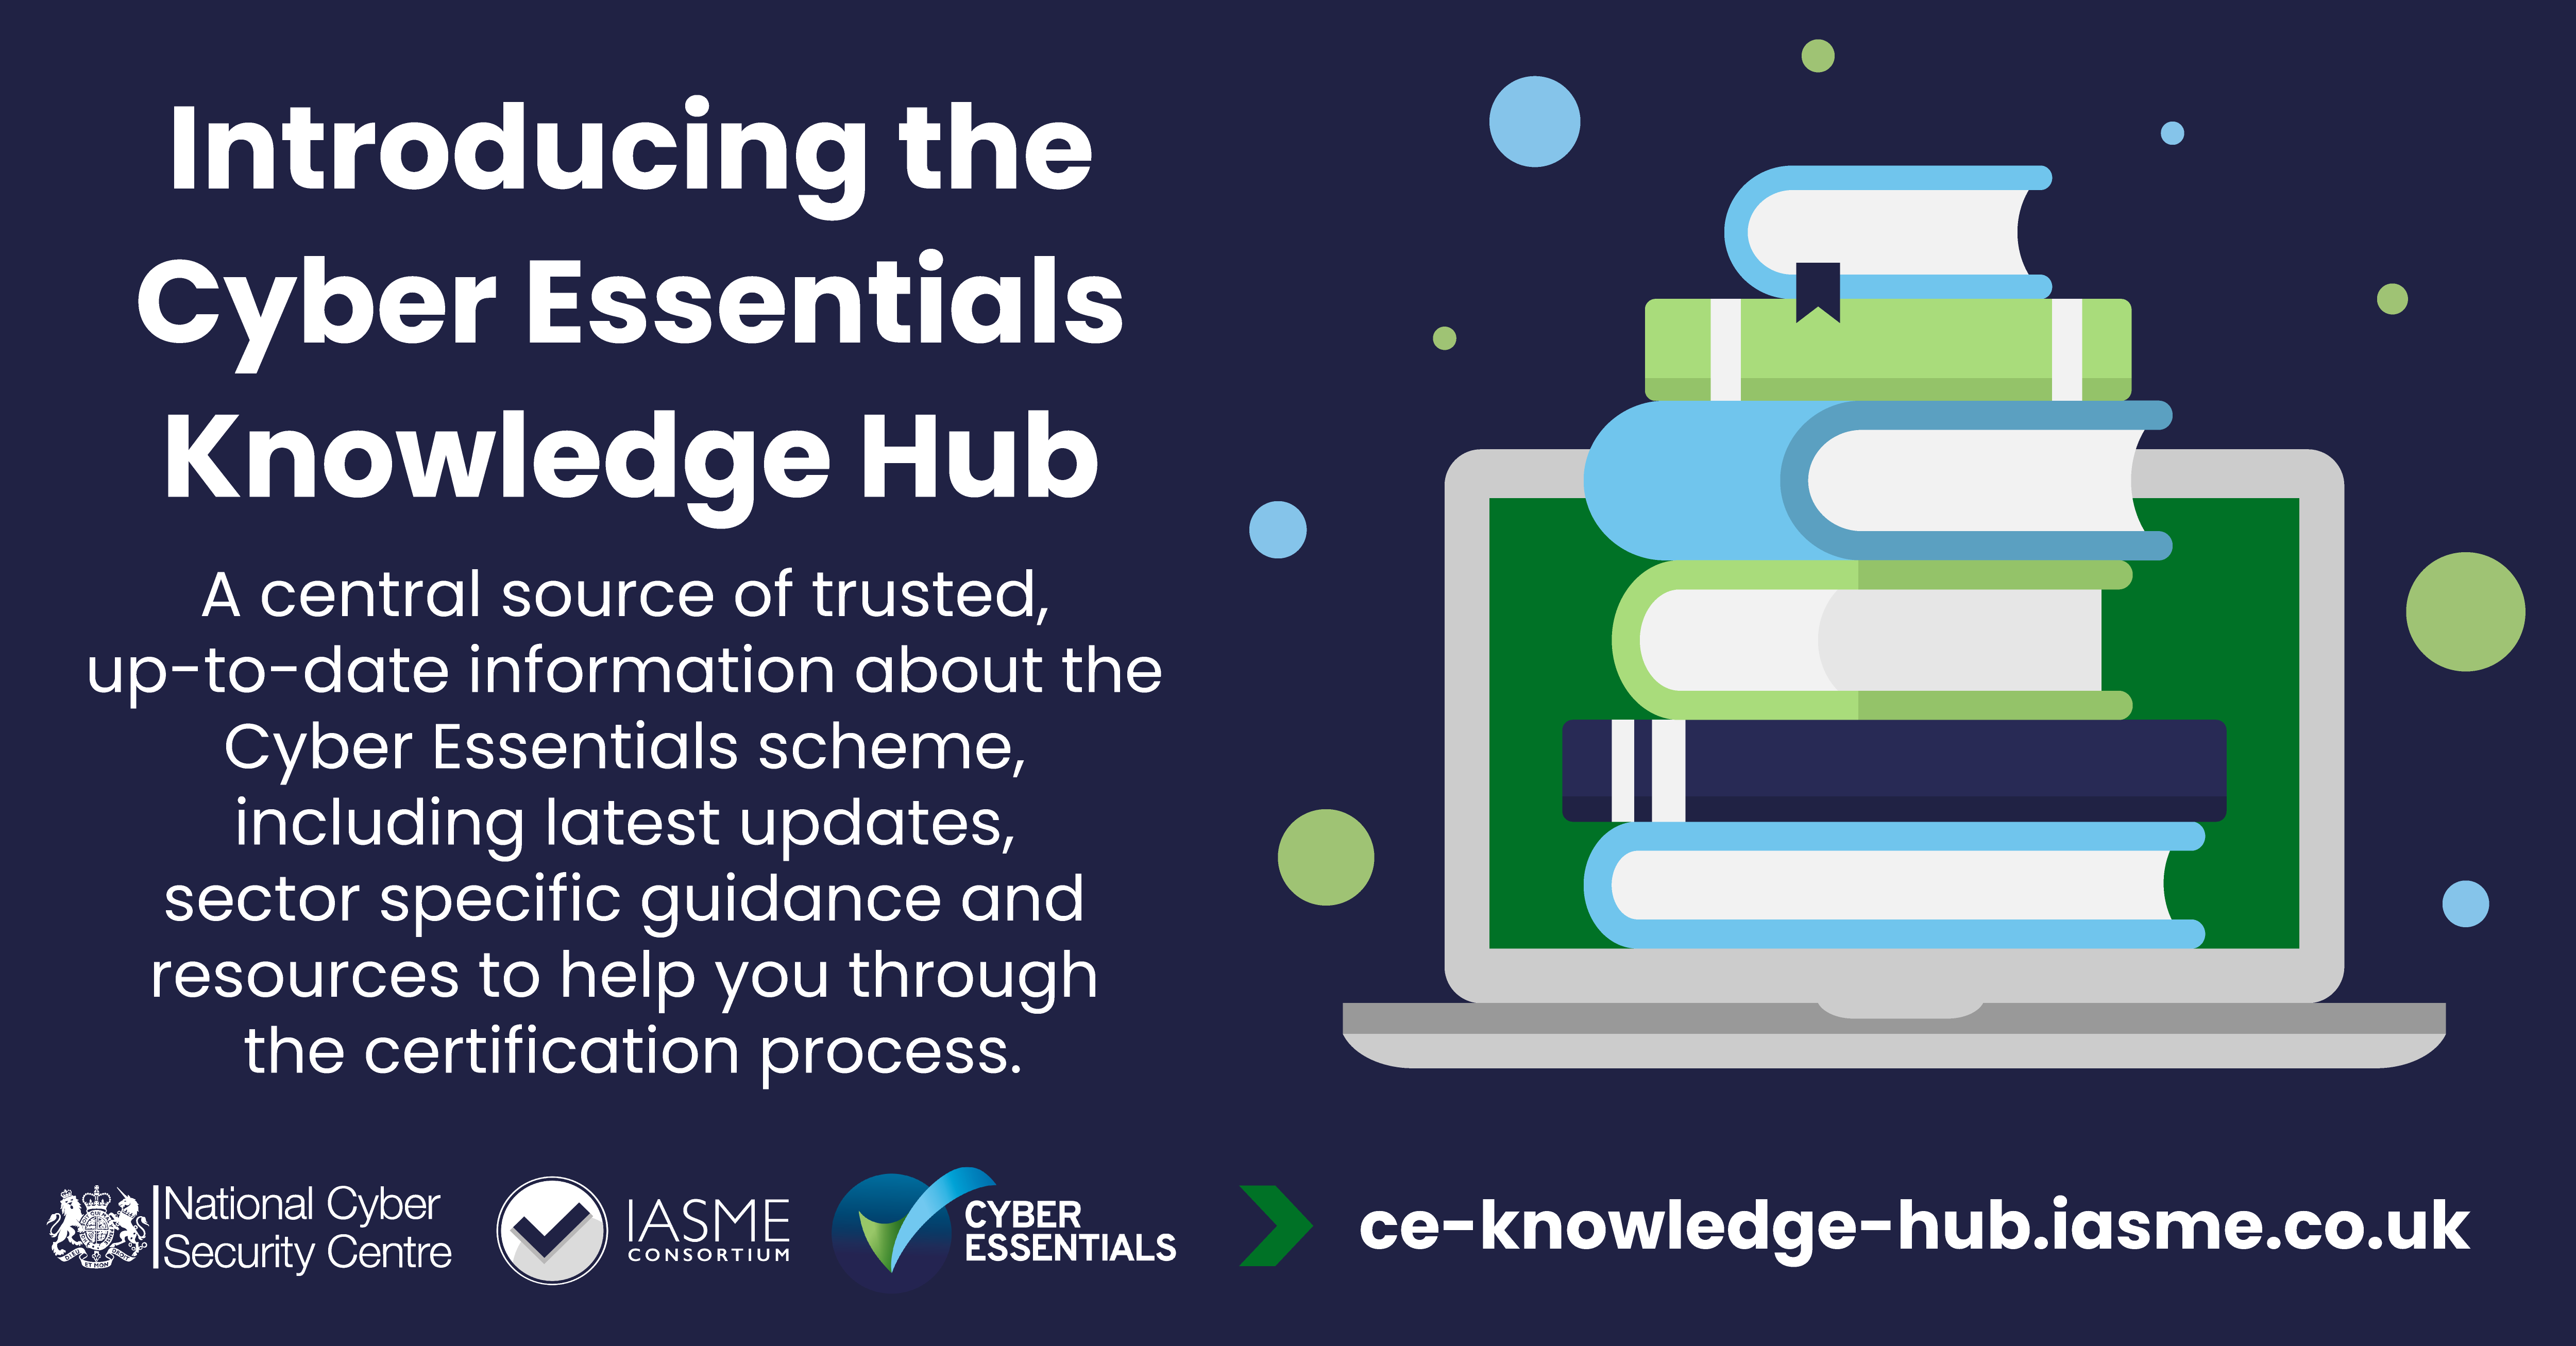 IASME announce the launch of the Cyber Essentials Knowledge Hub